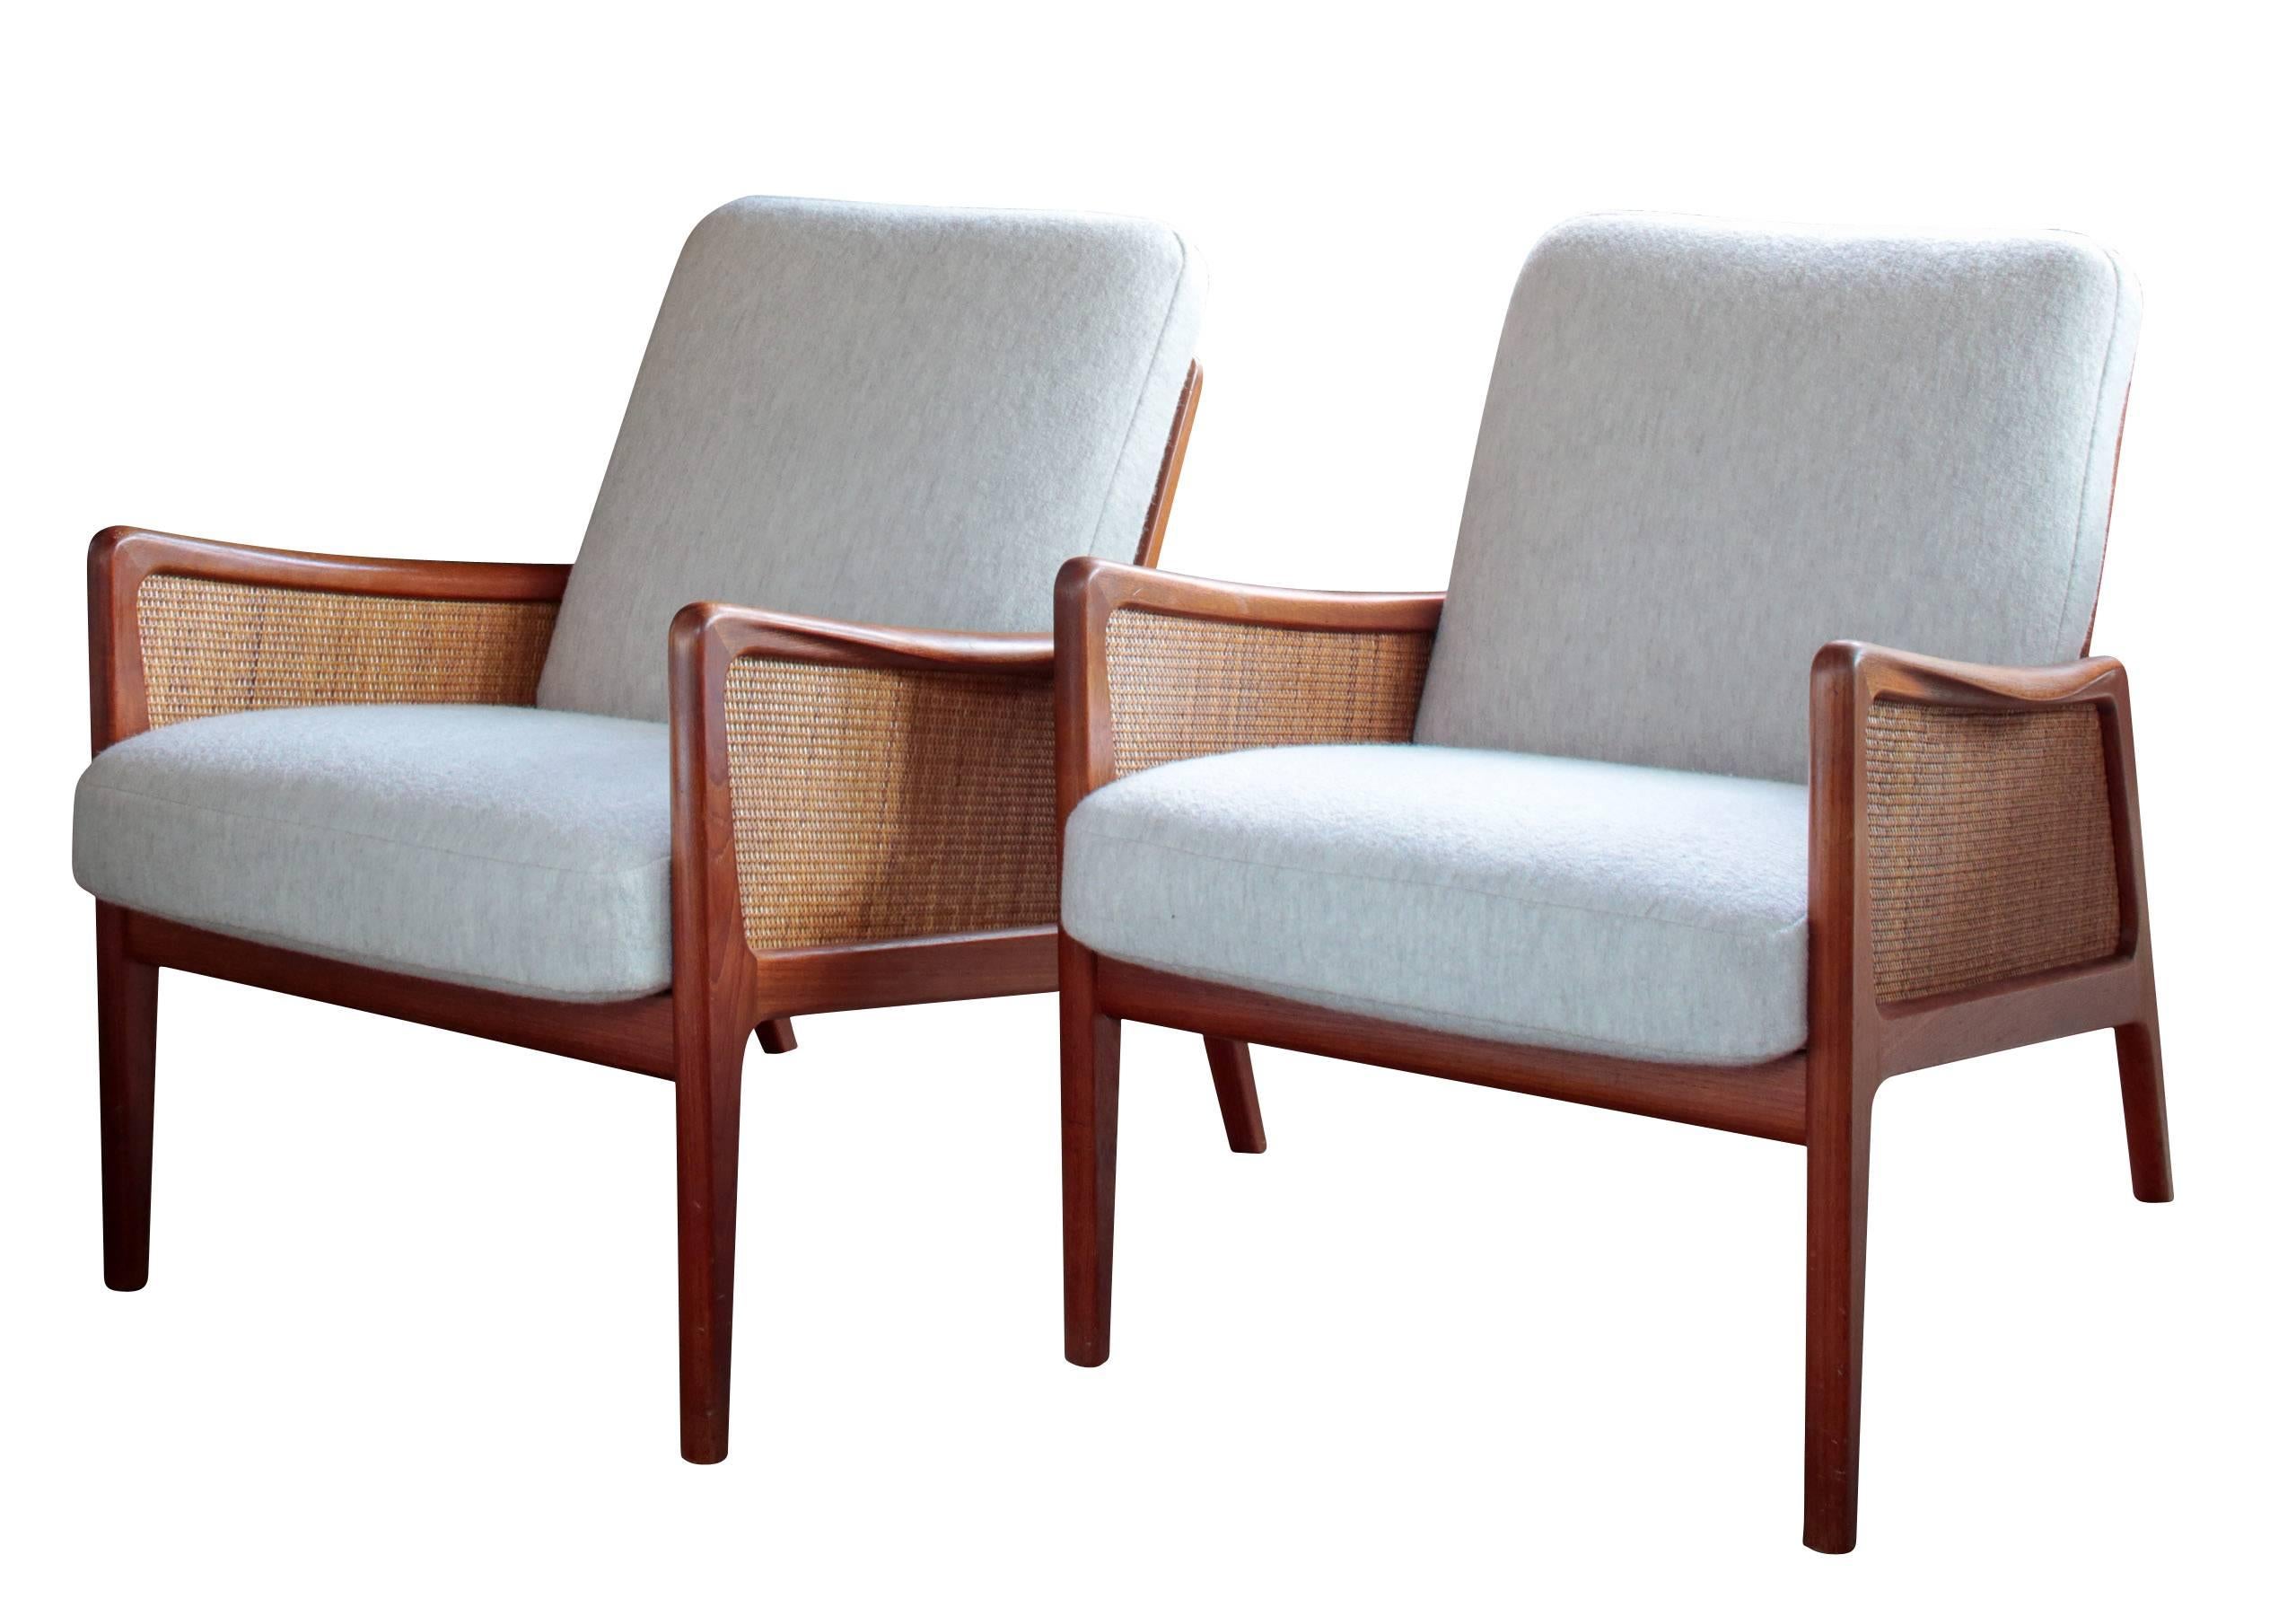 Stunning pair of Mid-Century Scandinavian Peter Hvidt and Olga Mølgaard armchairs. The chairs have been newly re-upholstered in boiled wool while the sides are in teak with original caning.